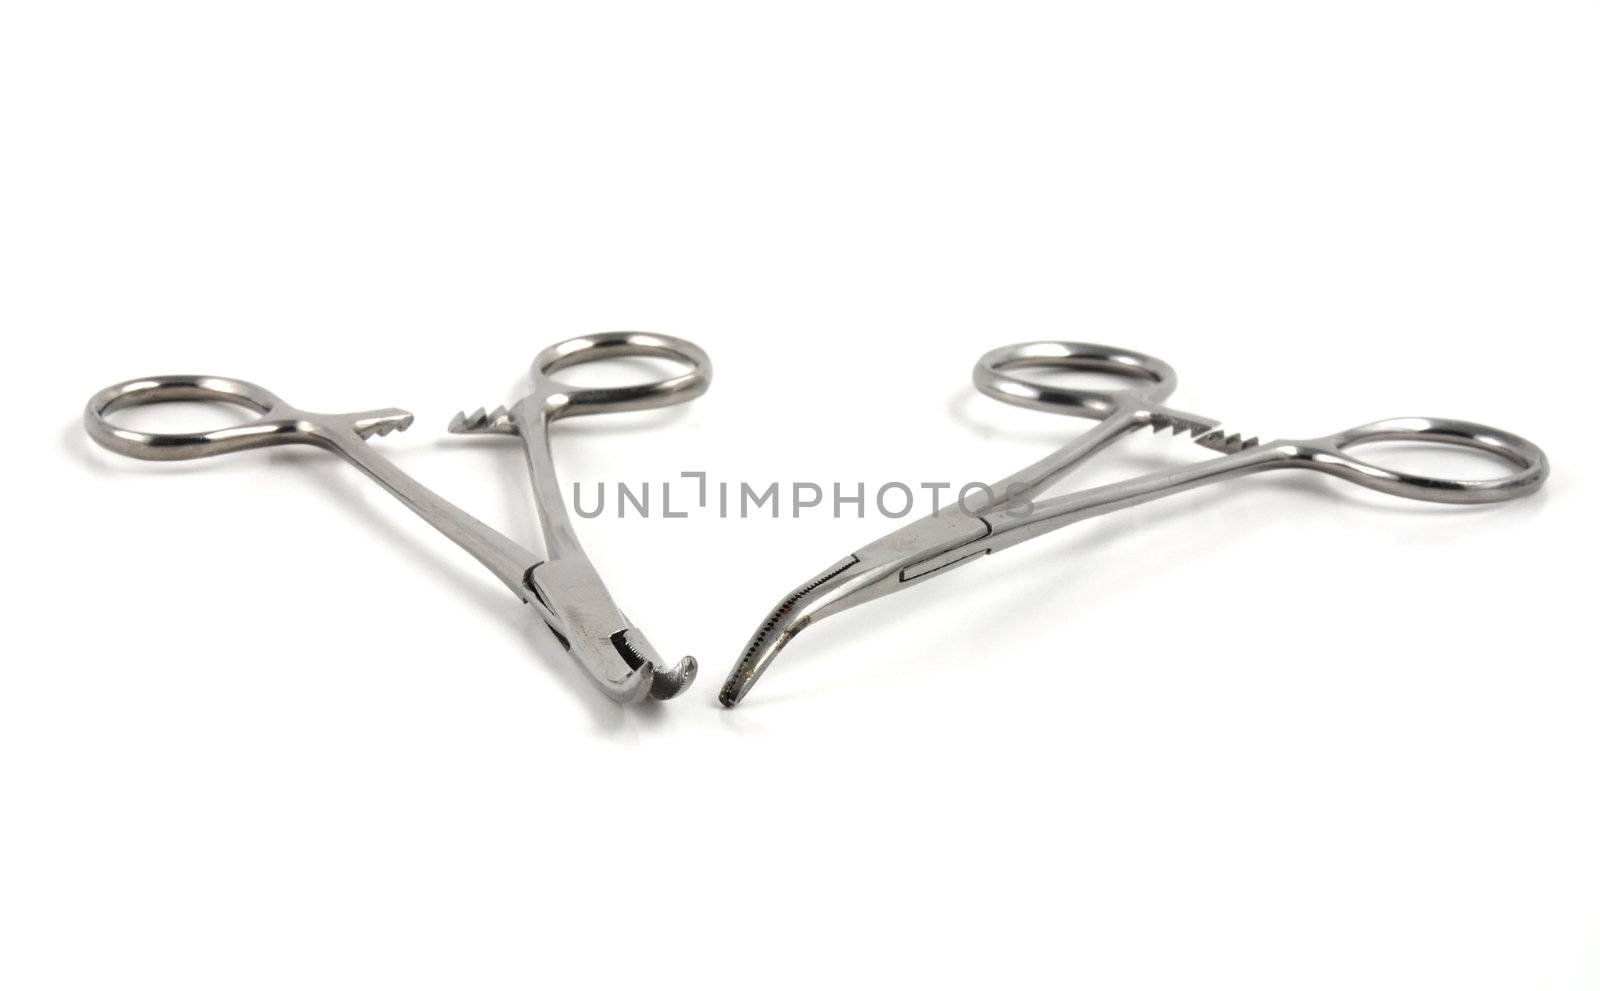 Stock pictures of hemostats used in surgical practice